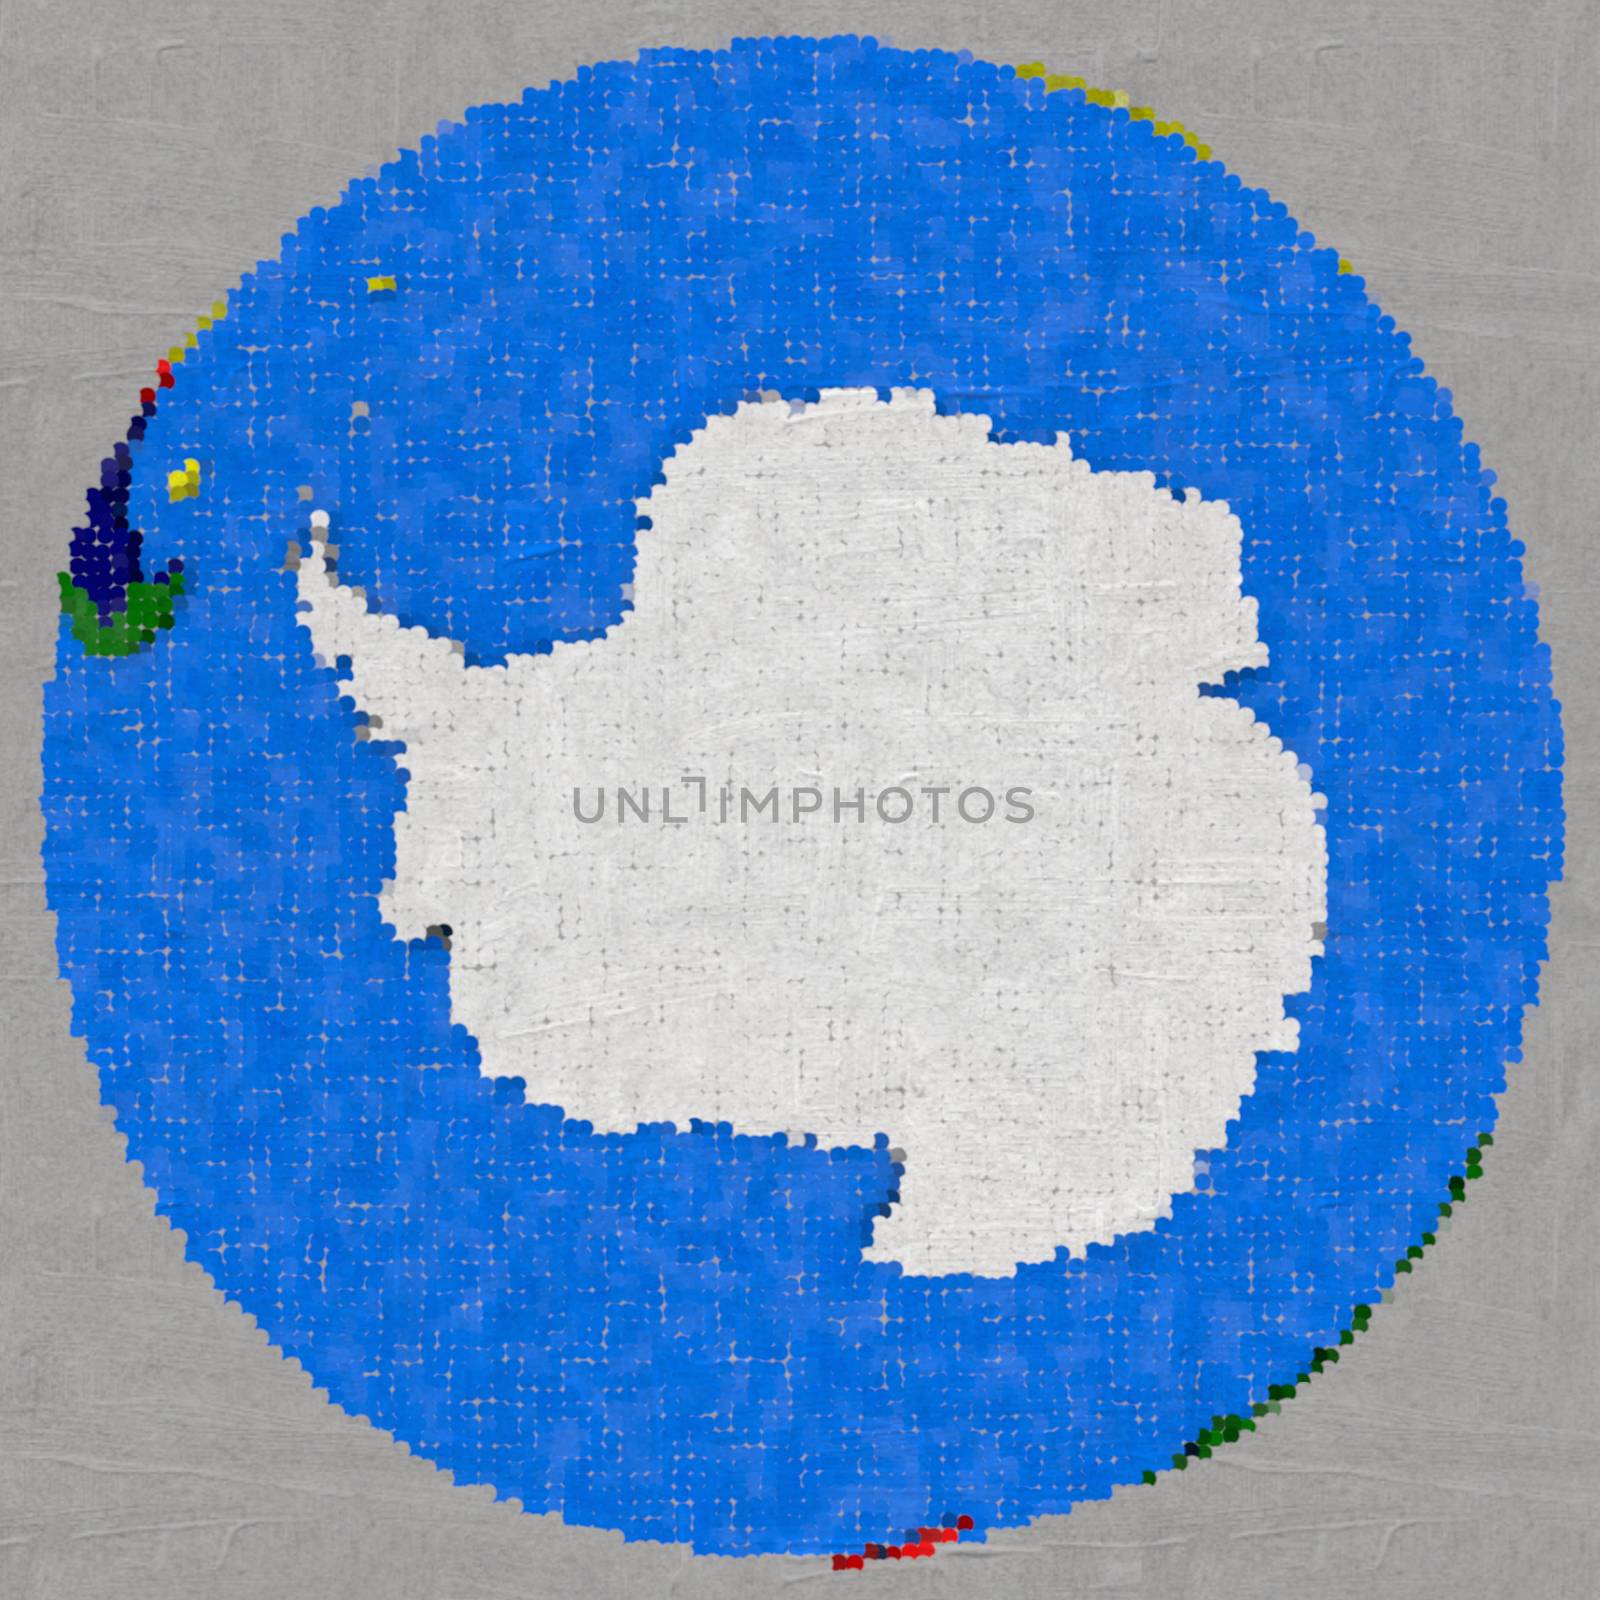 Drawing of Antarctica on Earth by Harvepino